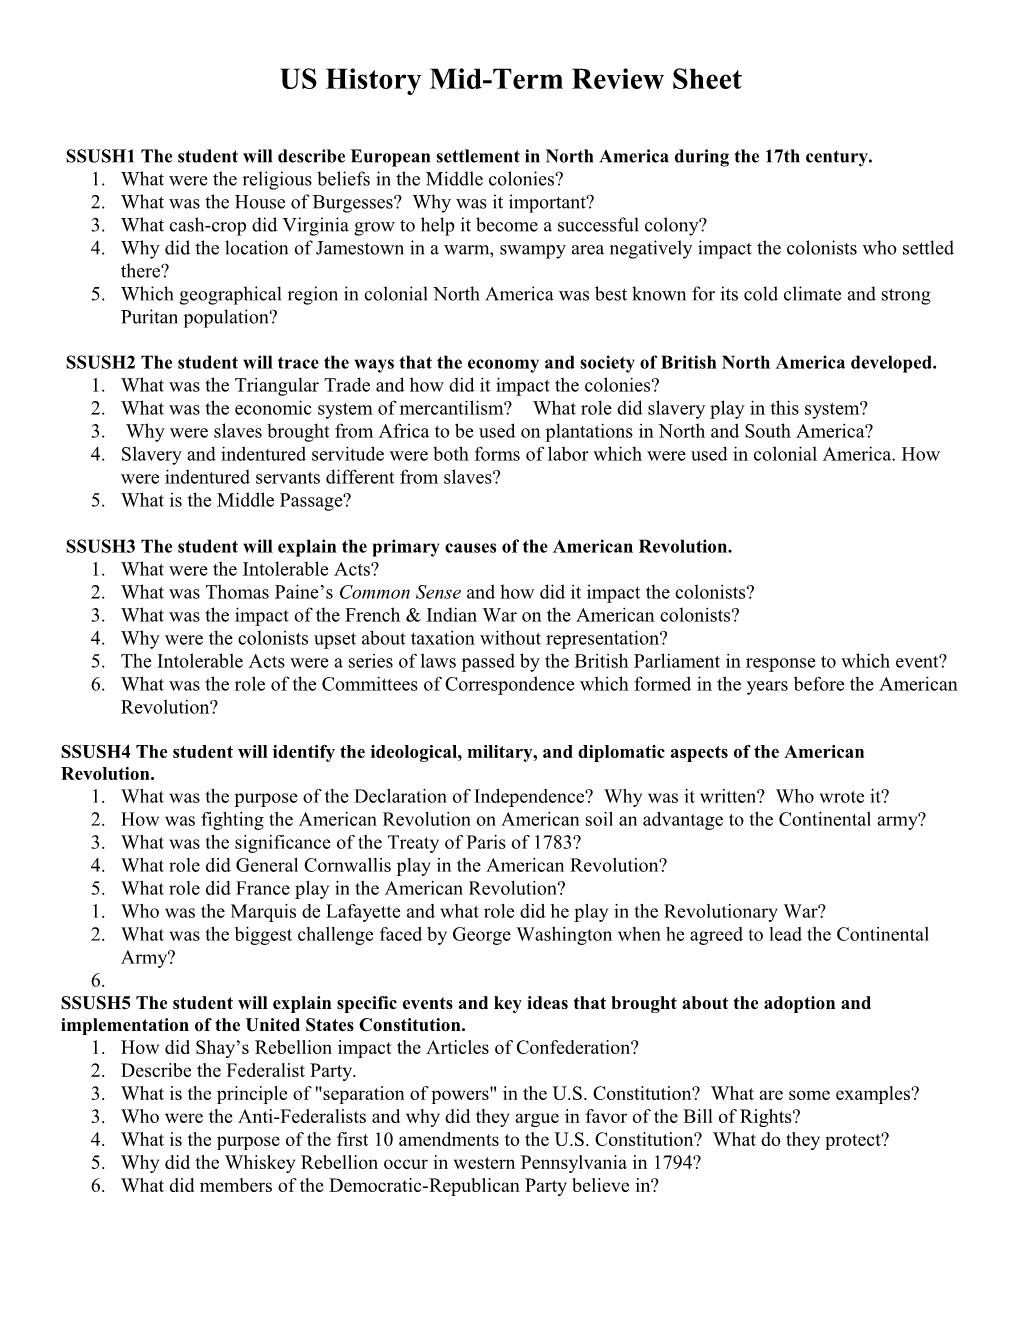 US History Mid-Term Review Sheet